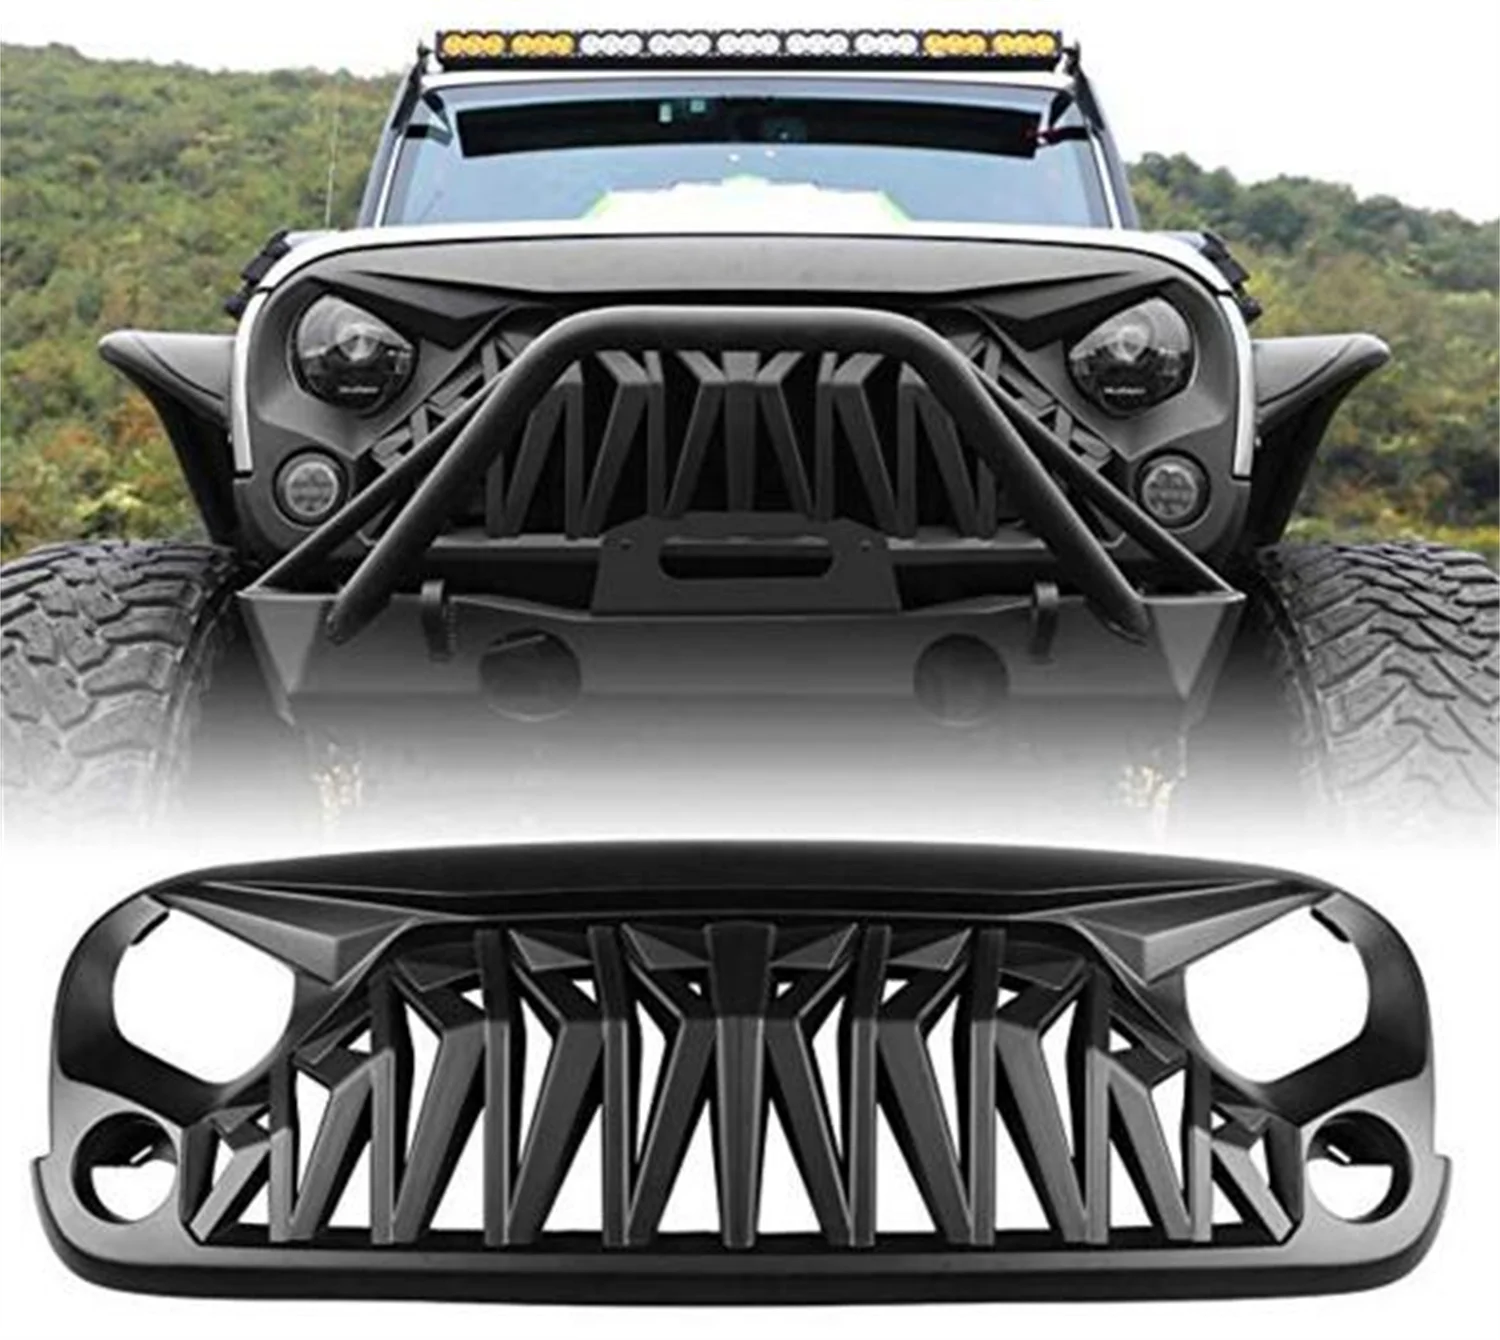 

SXMA Armor Grille Gladiator Front Grille Black Angry Front Grill Gladiator ABS for Jeep Wrangler JK 2007-2017 J347